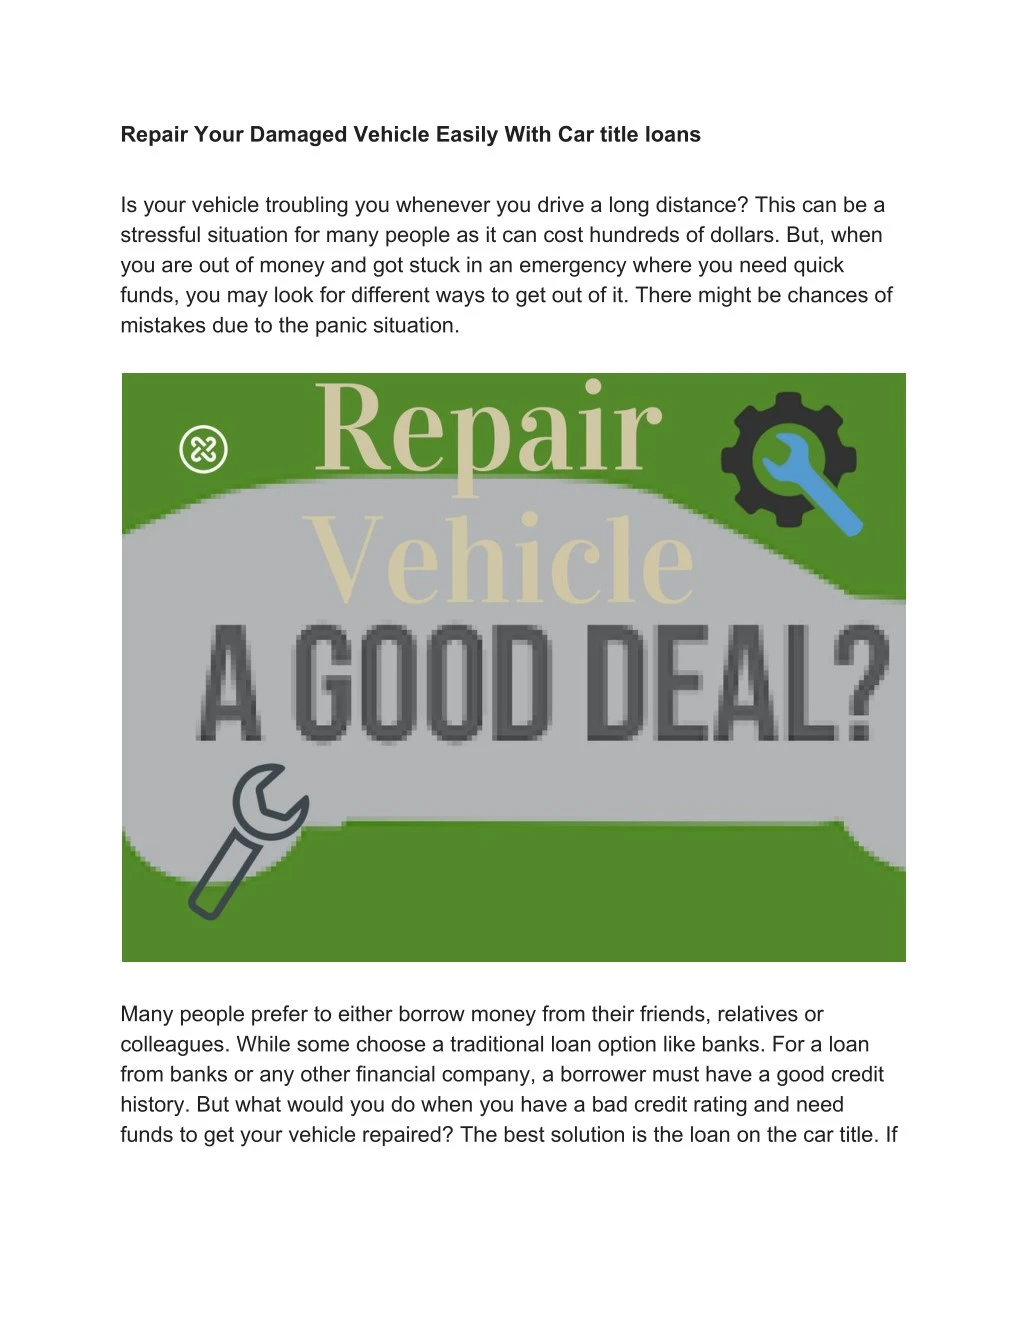 repair your damaged vehicle easily with car title